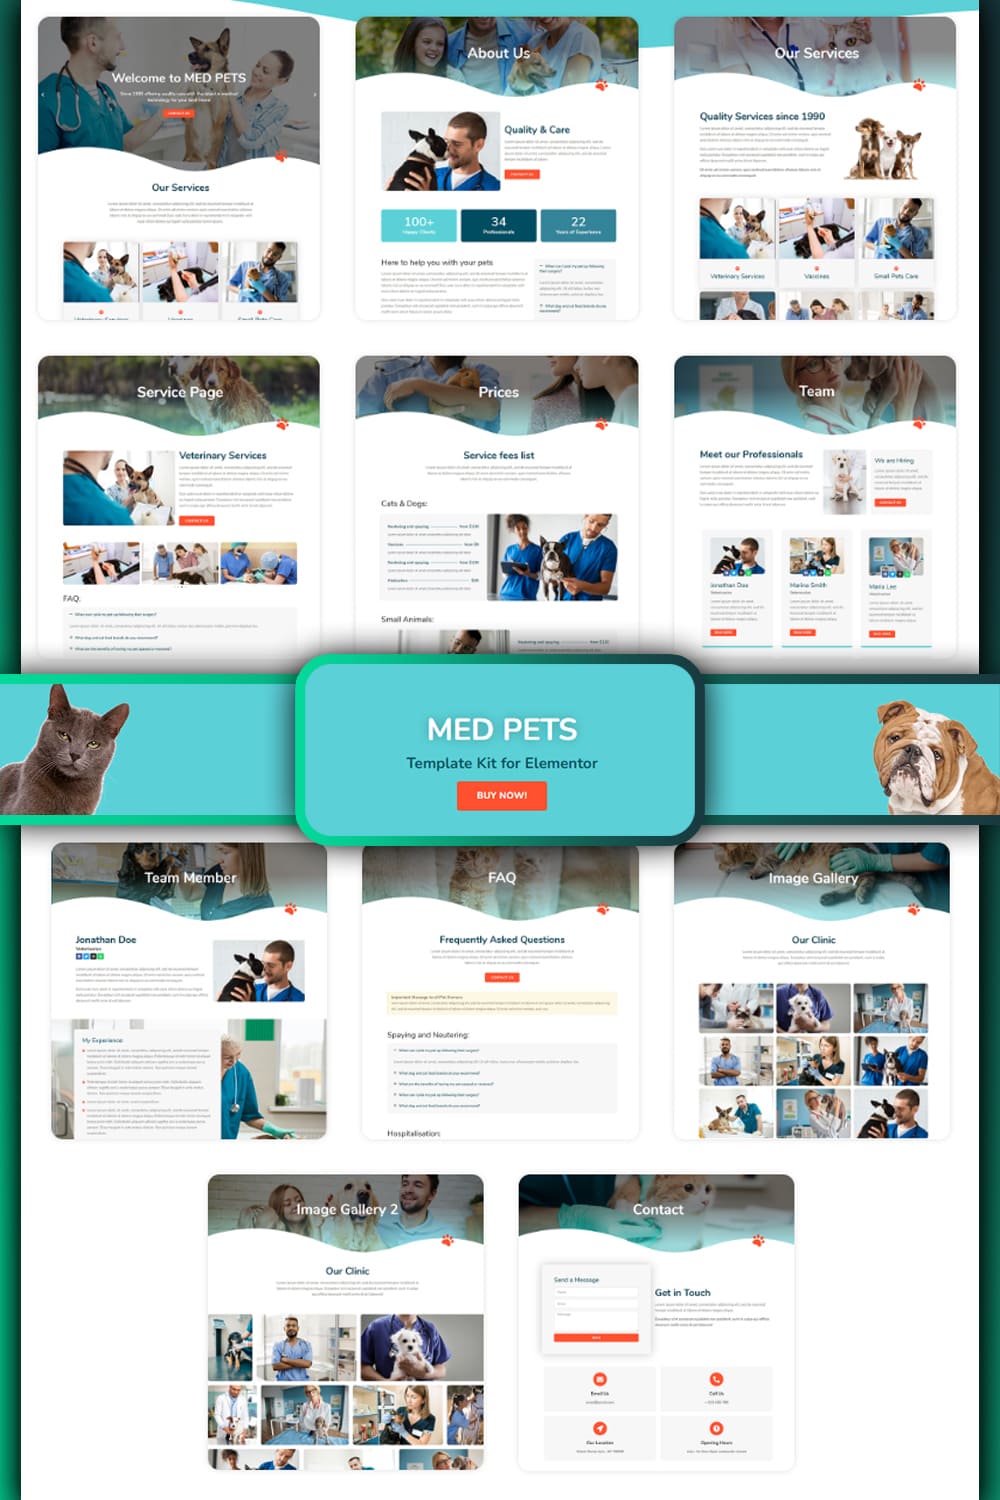 Professionals team of Med pets template kit for elementor.